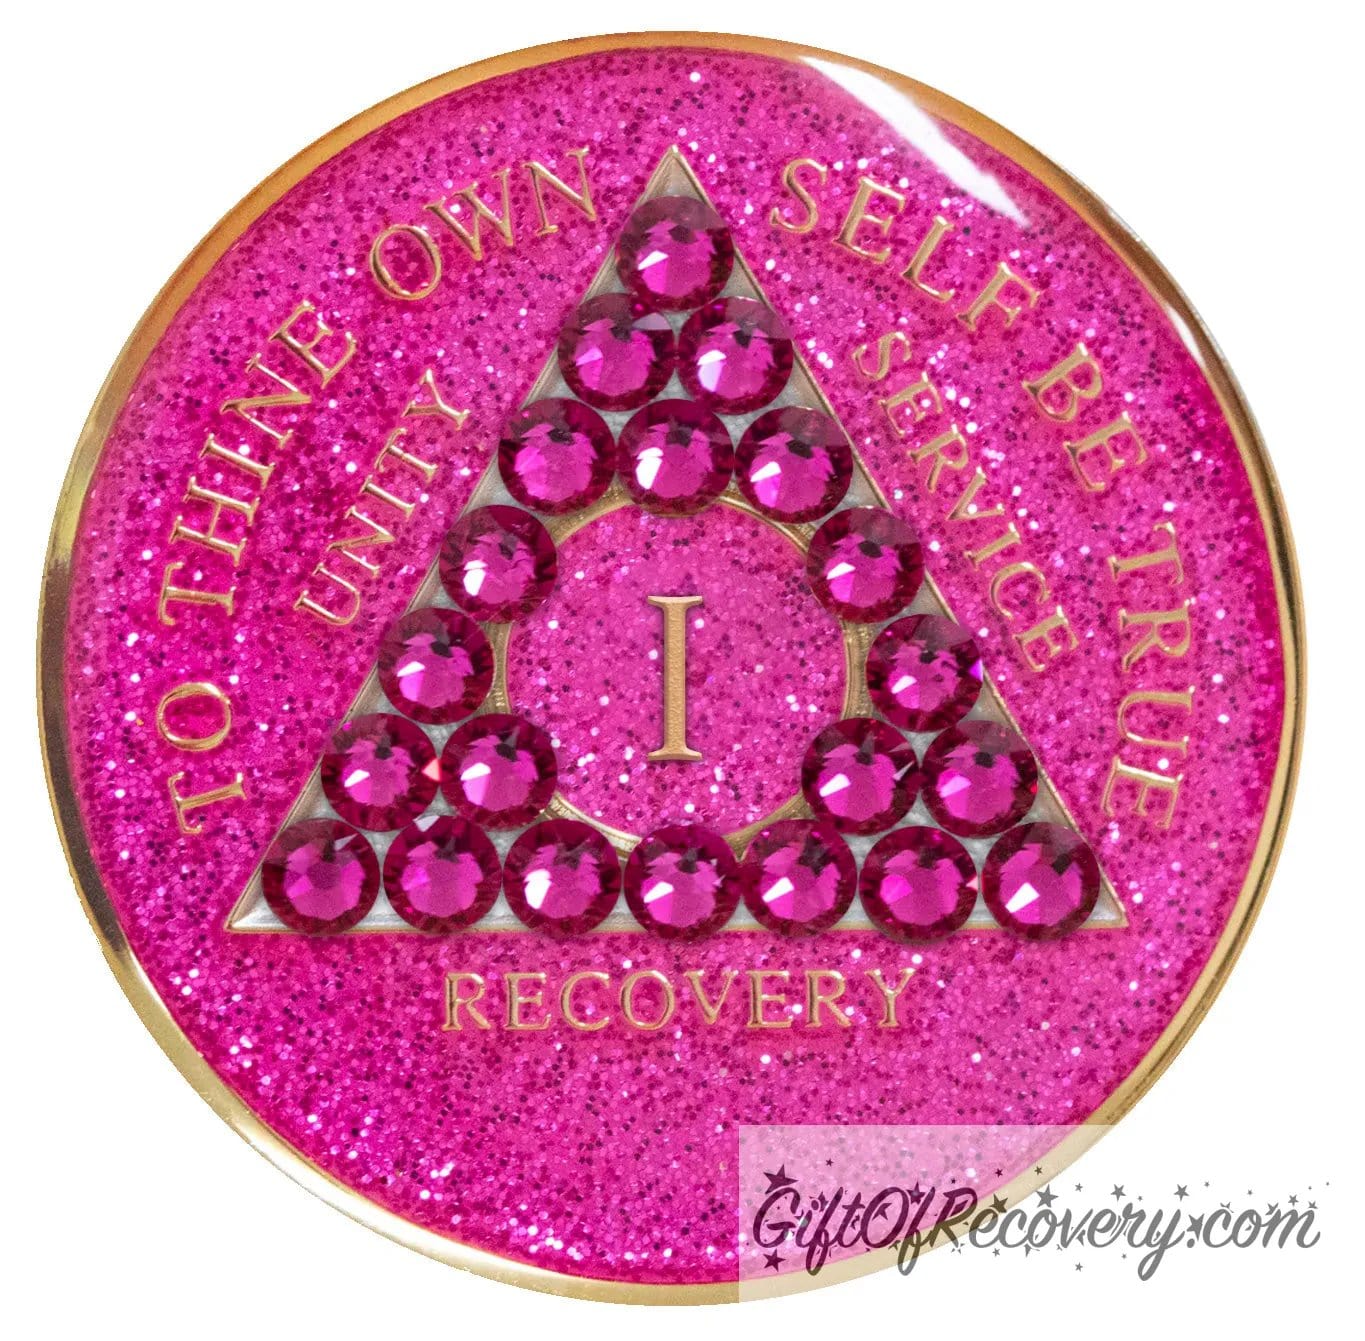 1 year Princess Pink Glitter AA medallion with 21 genuine fuchsia crystals in the shape of a triangle in the center of the recovery medallion, for your favorite sober princess, and to thine own self be true, unity, service, recovery, the roman numeral in the middle, and the outer rim, embossed in 14k plated brass, the aa medallion is sealed in resin for a shiny finish.